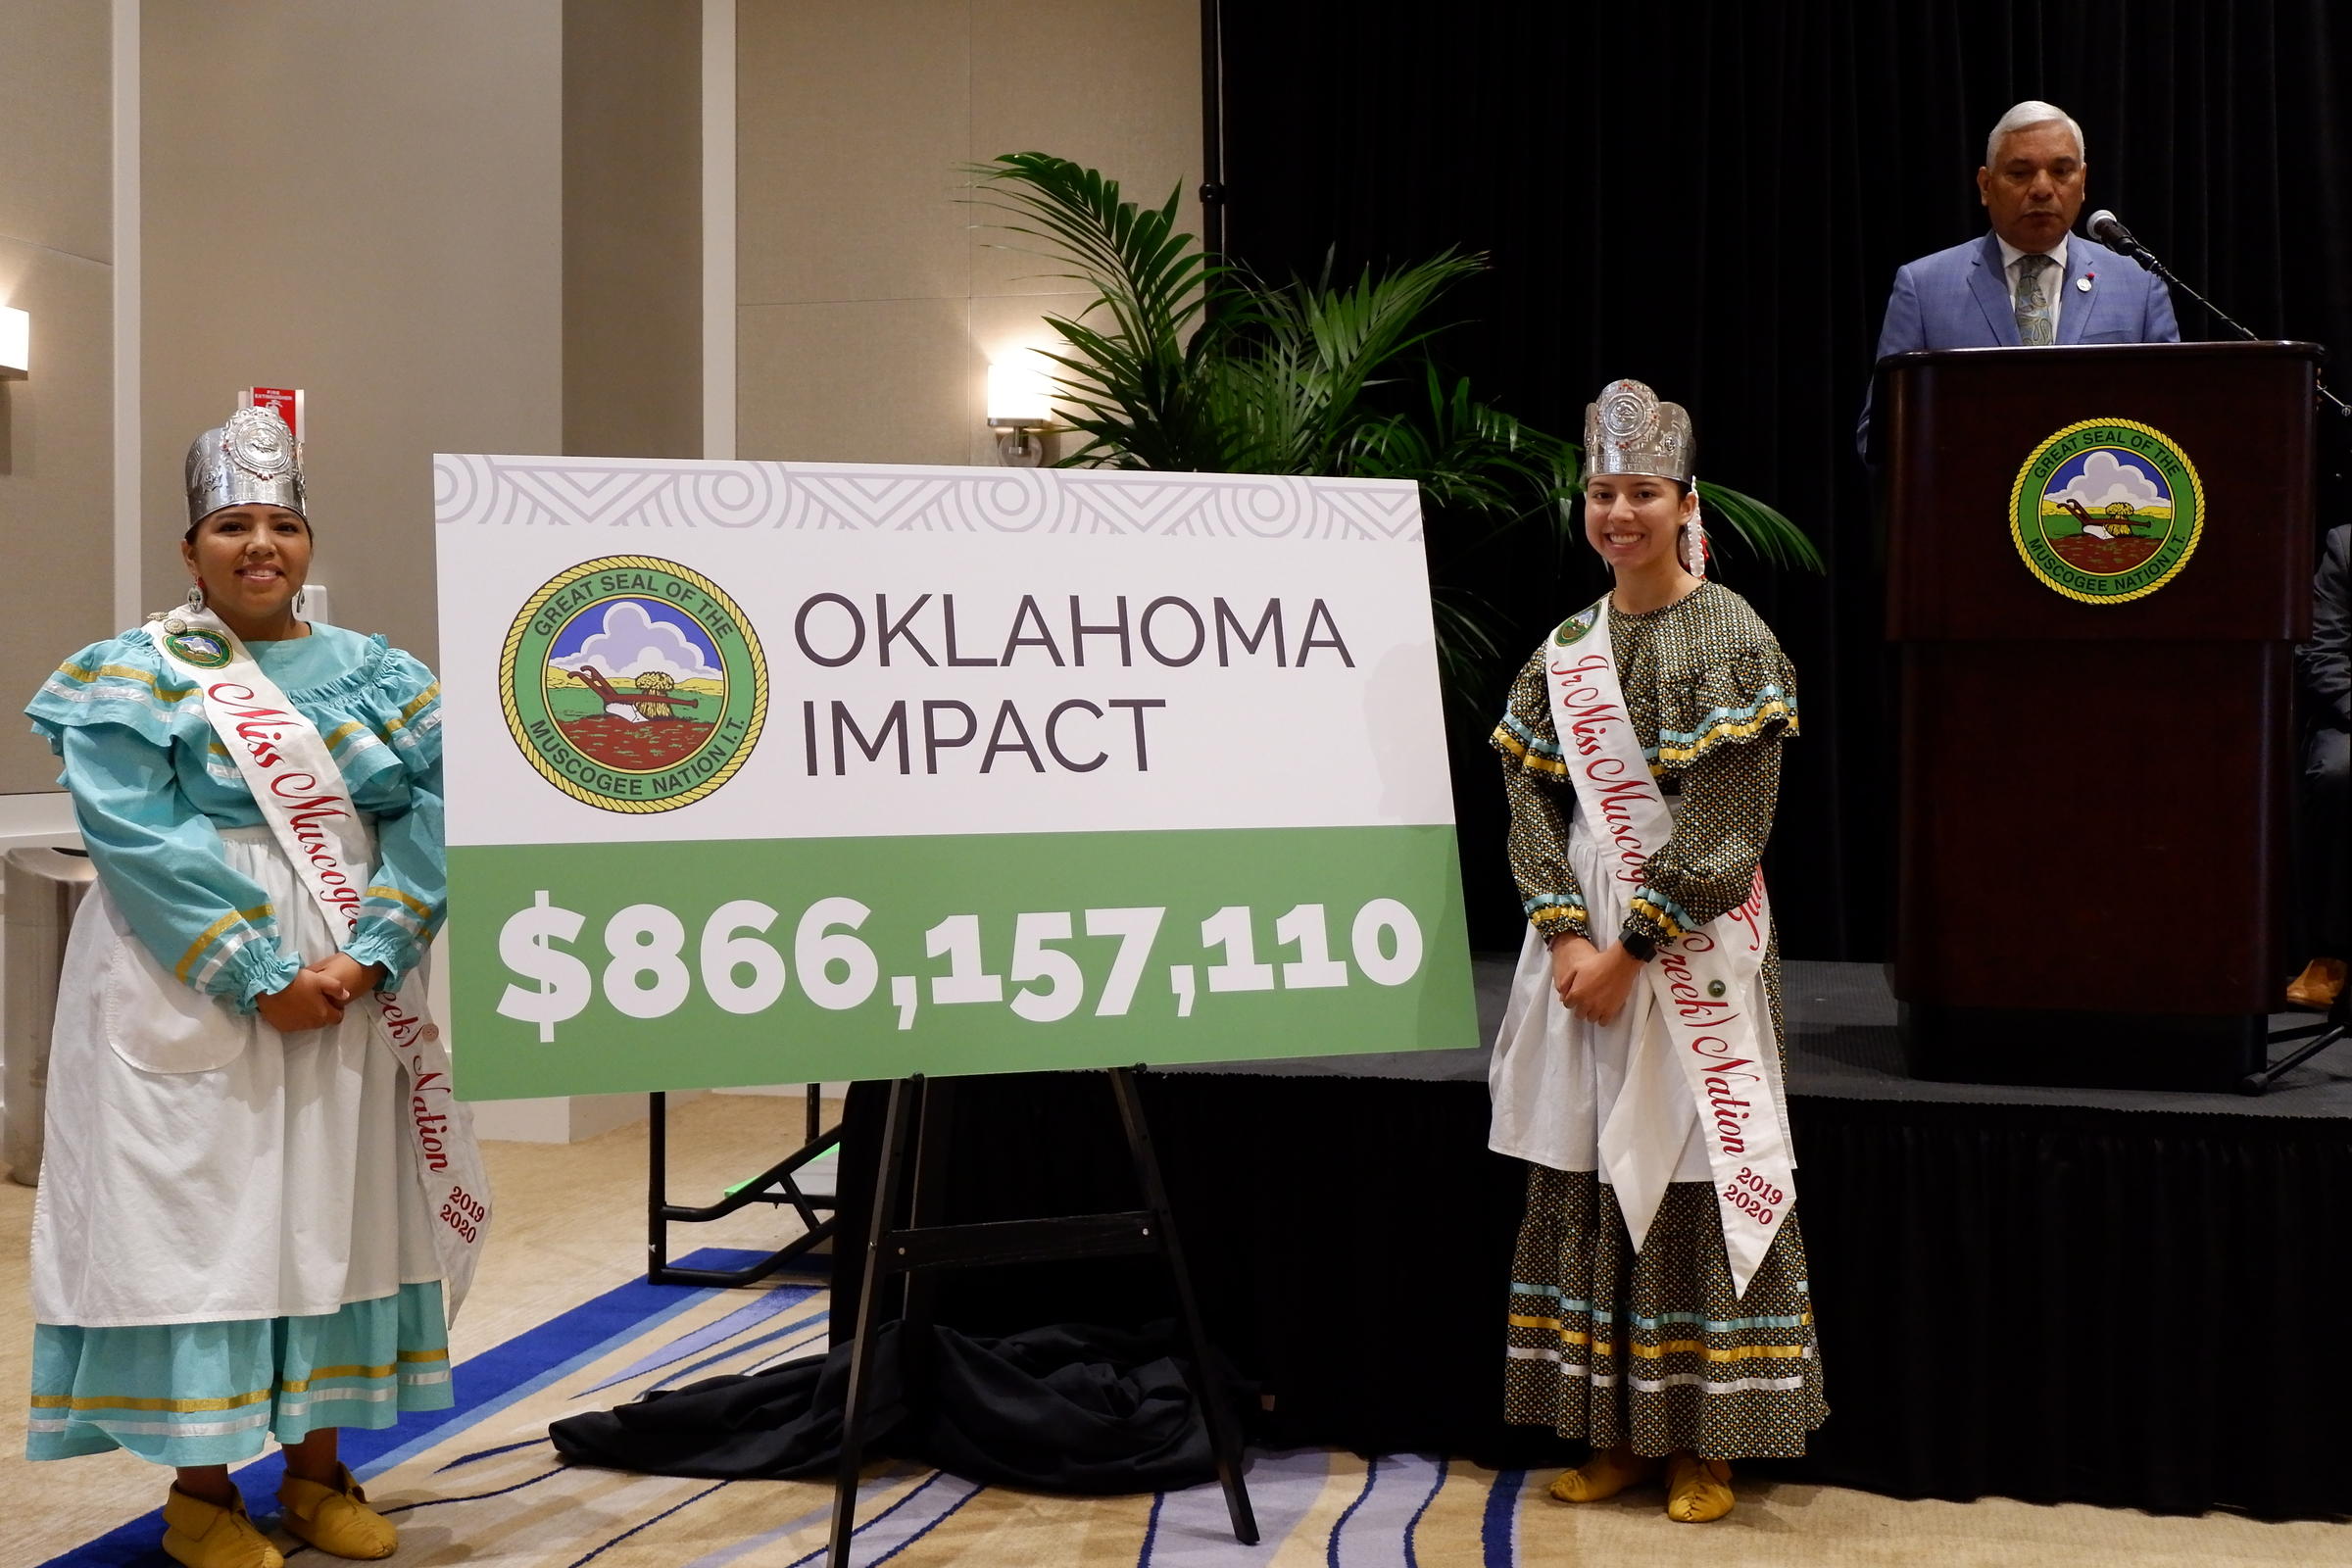 Muscogee (Creek) Nation Claims Economic Impact of $866M in Oklahoma